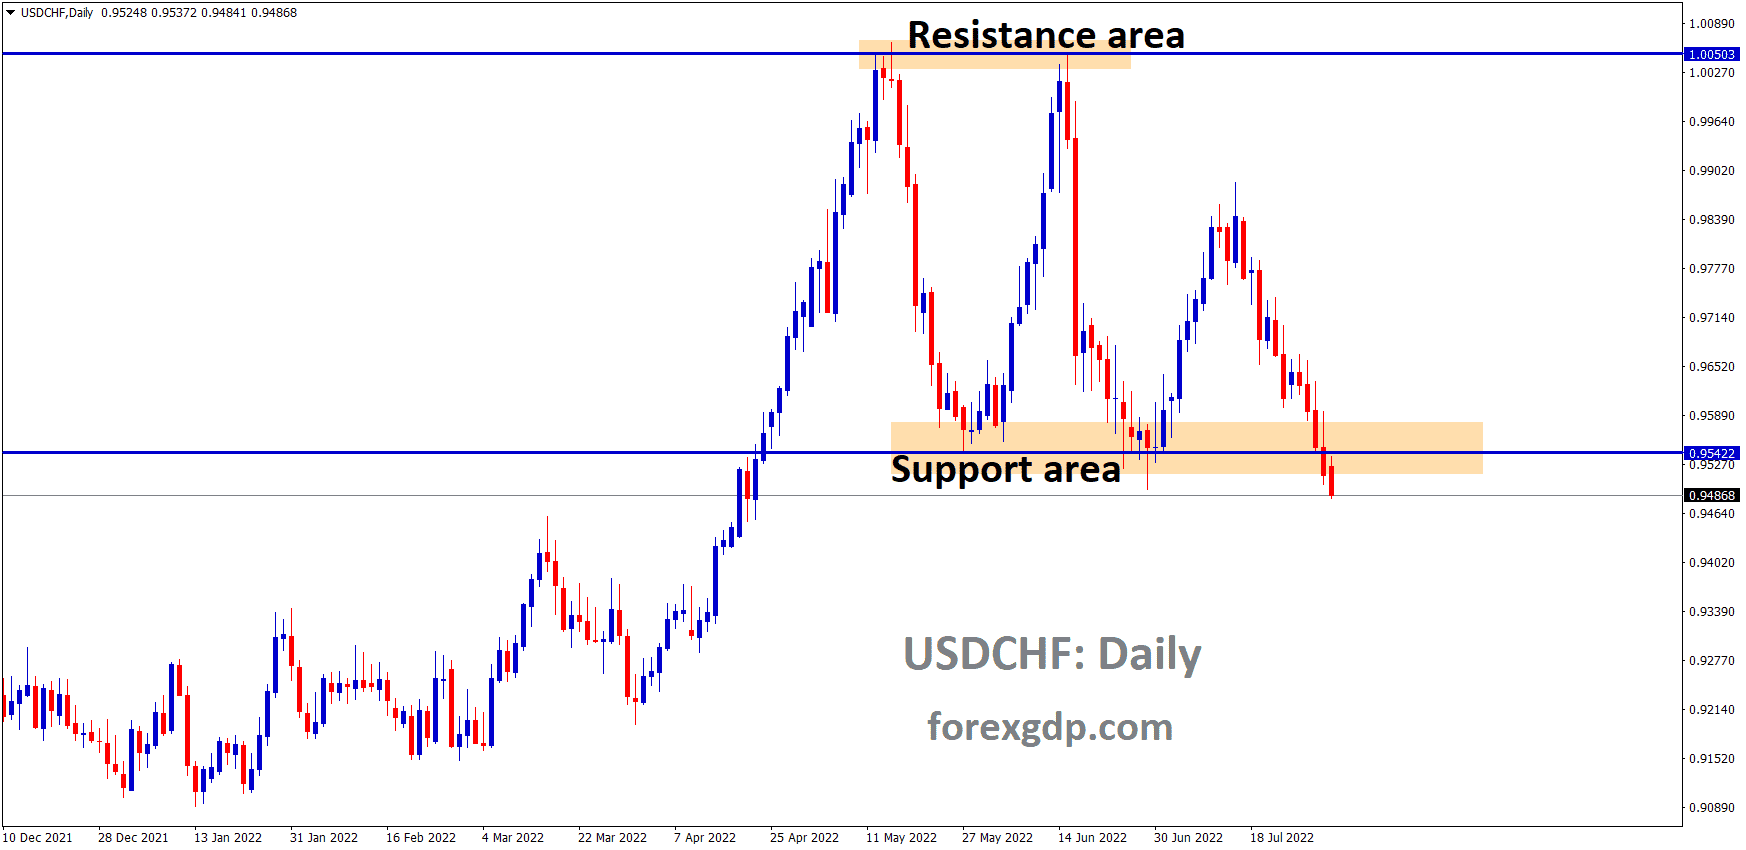 USDCHF is moving in the Box Pattern and the Market has reached the Horizontal support area of the pattern